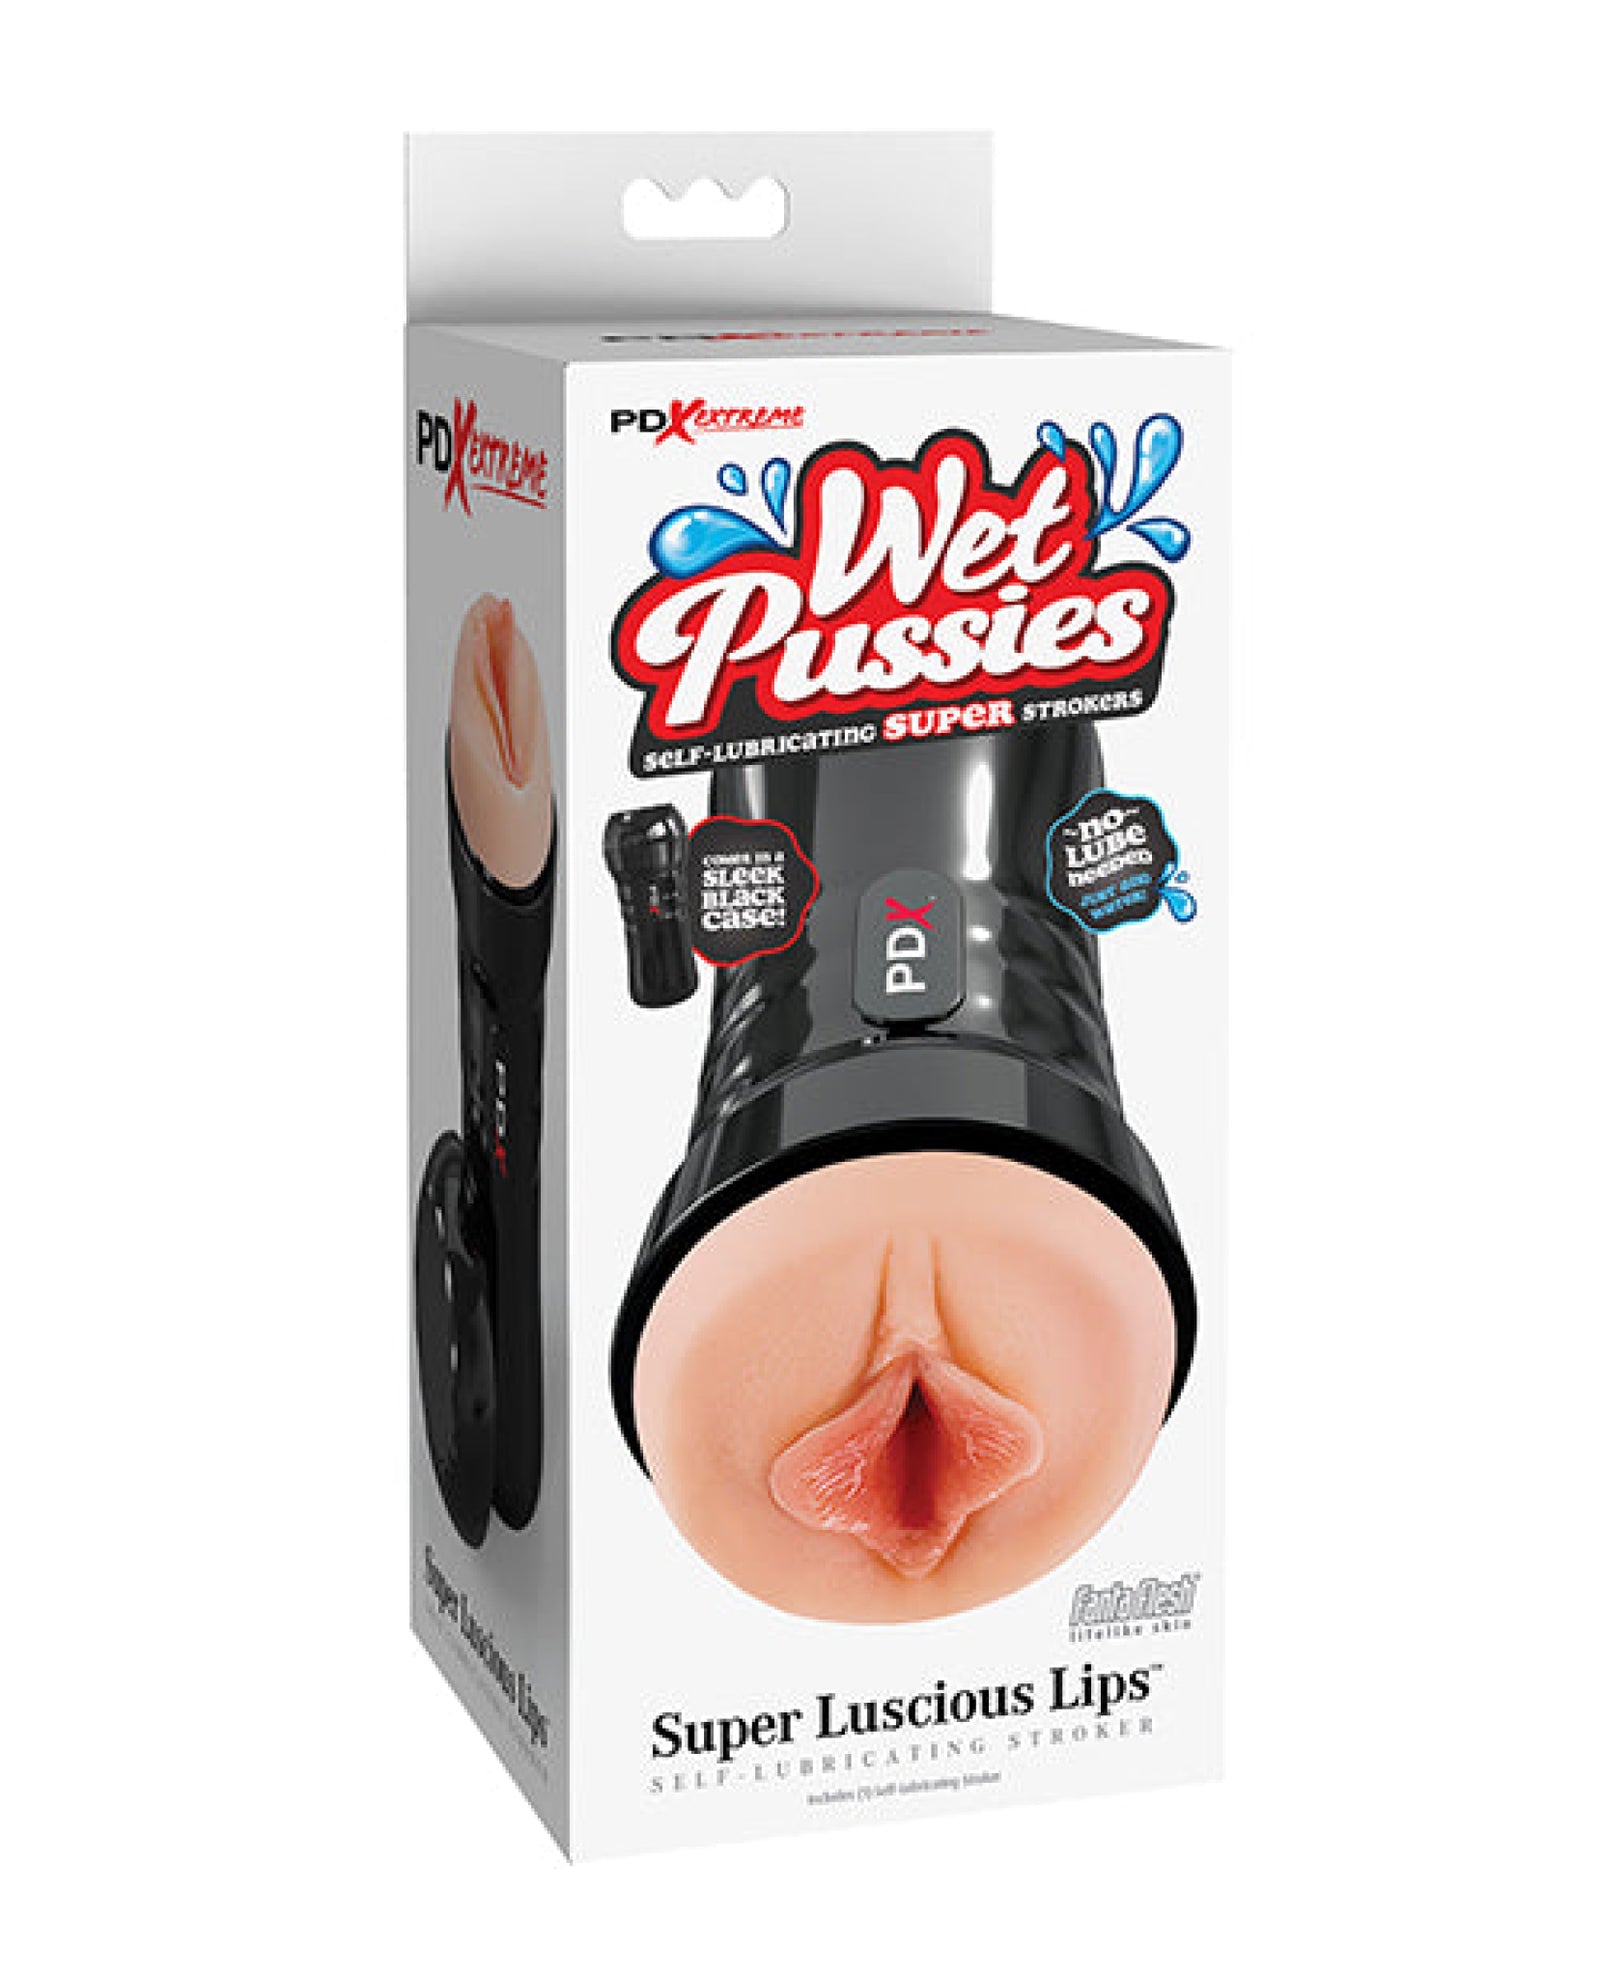 PDX Extreme Wet Pussies Super Luscious Lips Stroker Pdx Brands